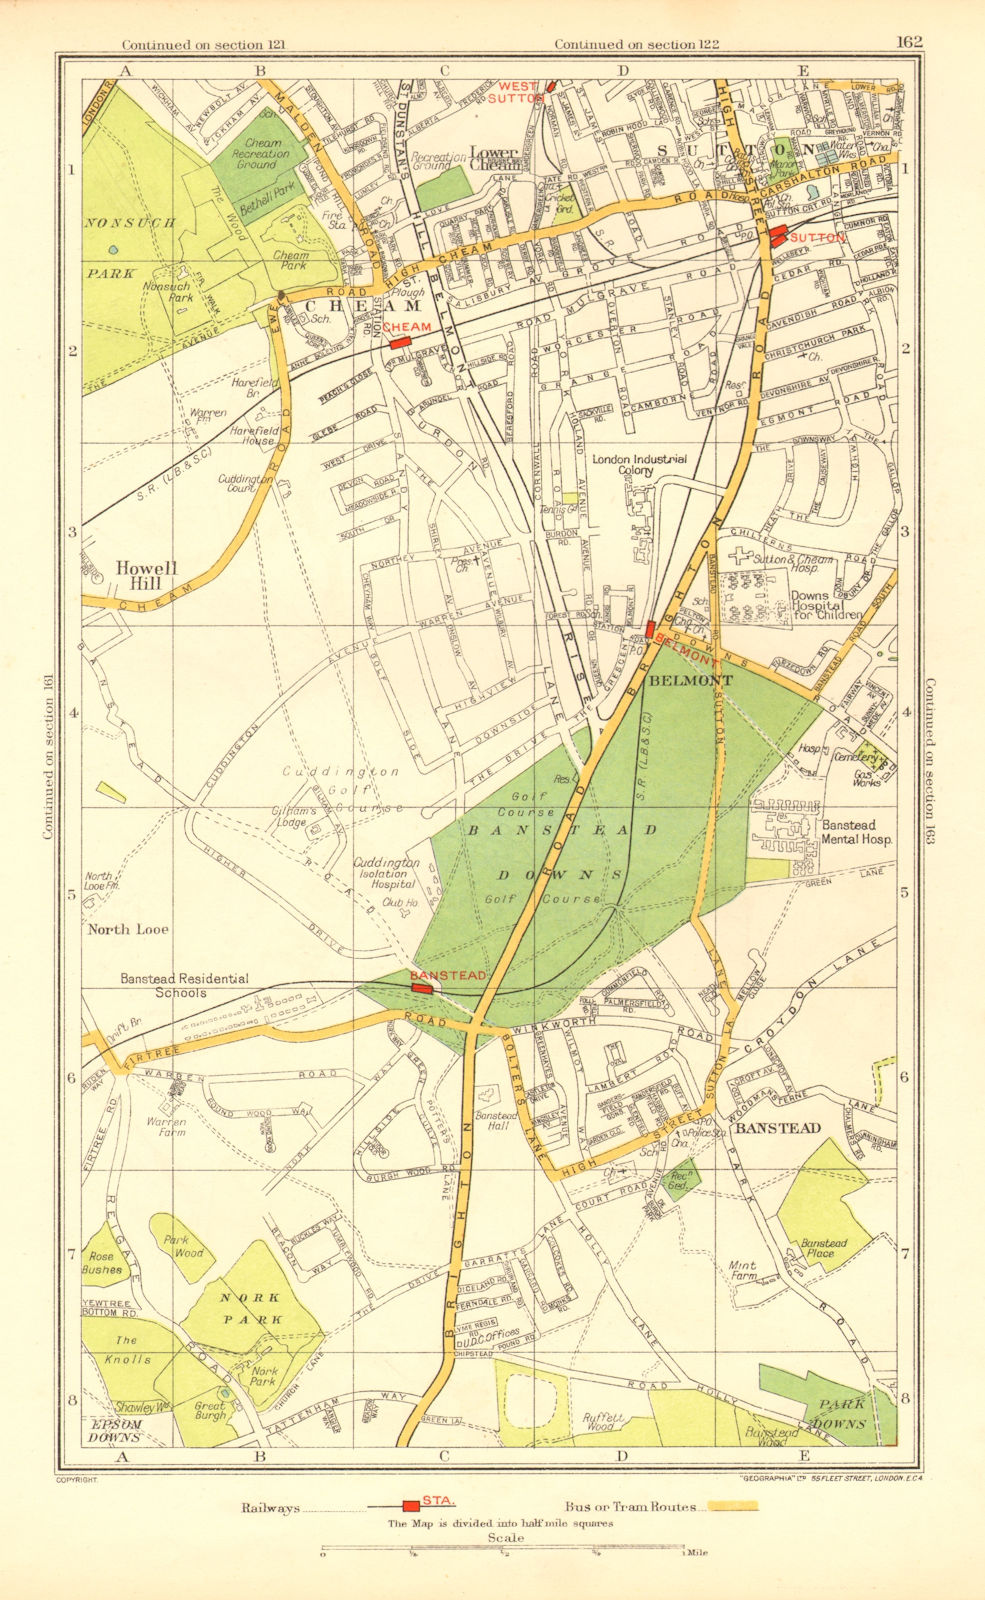 SUTTON CHEAM BANSTEAD. Belmont Nork East Ewell Carshalton Beeches 1937 old map